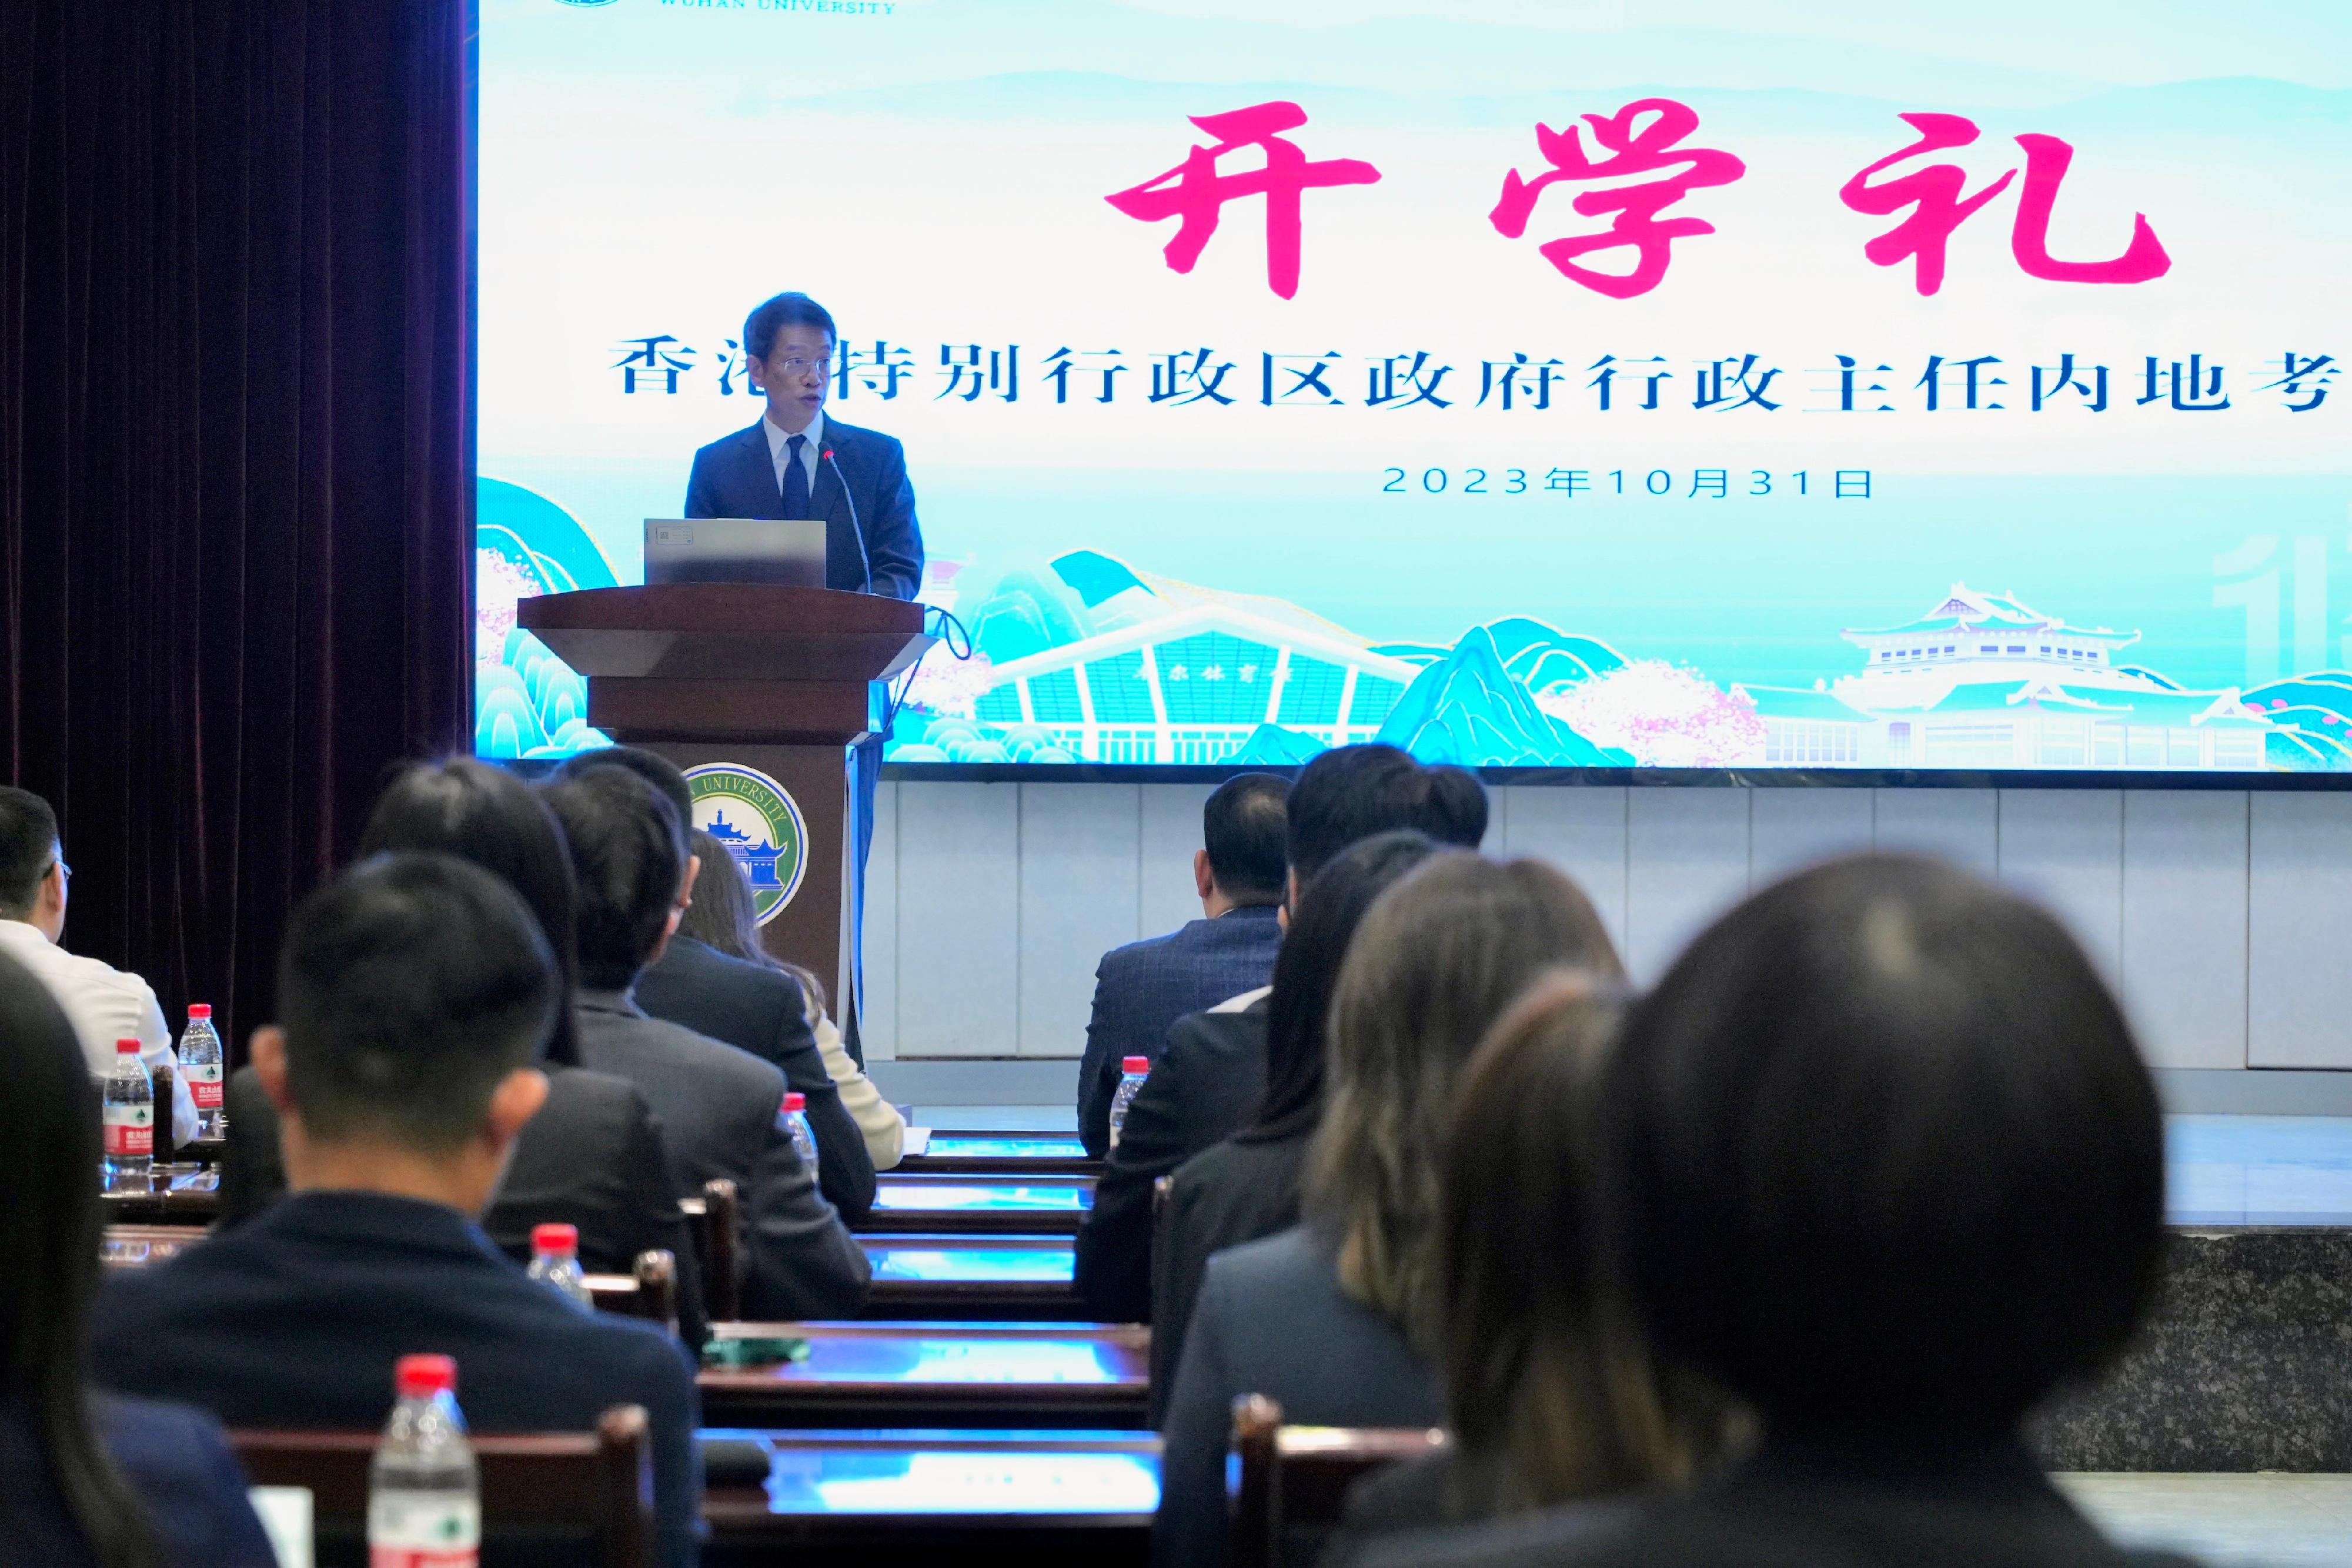 The first Mainland Study Tour for Executive Officers organised by the Hong Kong Special Administrative Region Government in partnership with Wuhan University had its opening ceremony in Wuhan today (October 31). Photo shows the Permanent Secretary for the Civil Service, Mr Clement Leung, addressing the ceremony.